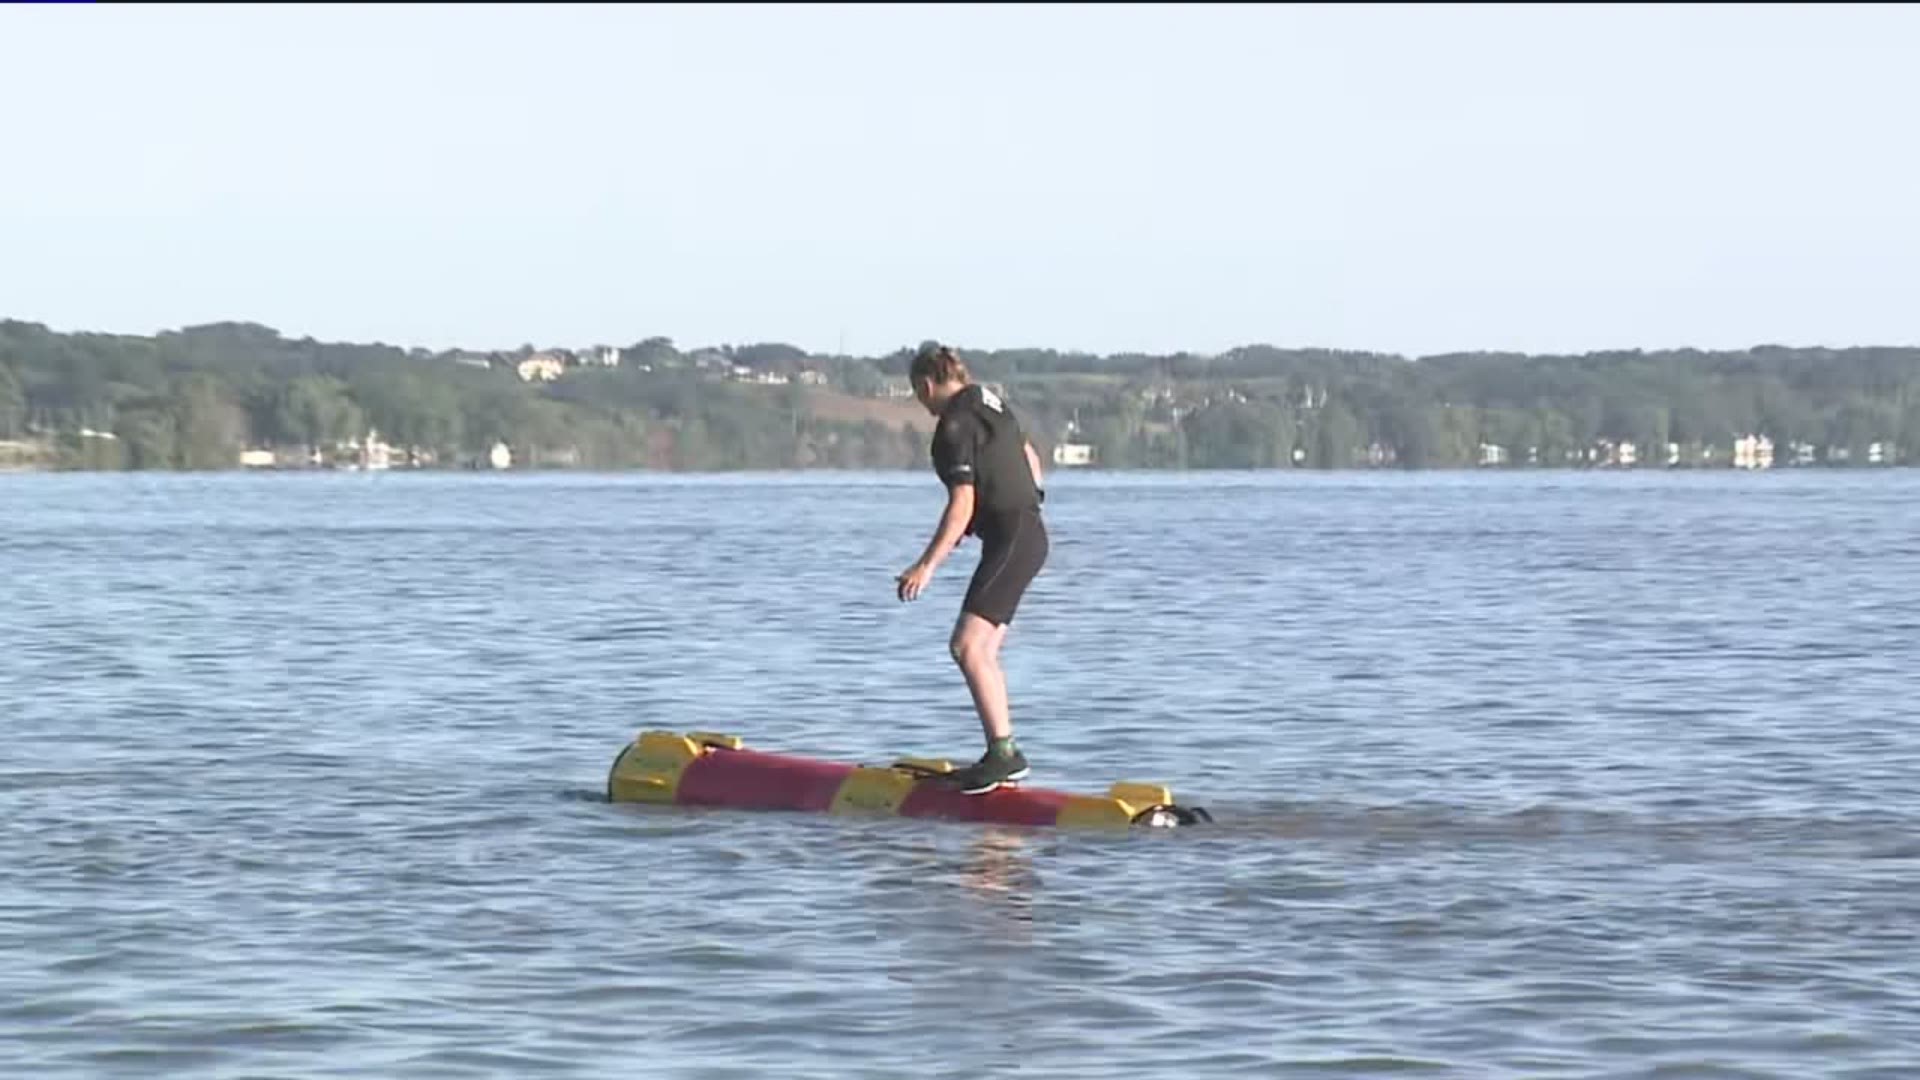 A Maine woman from Ellsworth became the first person to roll on a log across the Mississippi River on Thursday, Sept. 26.